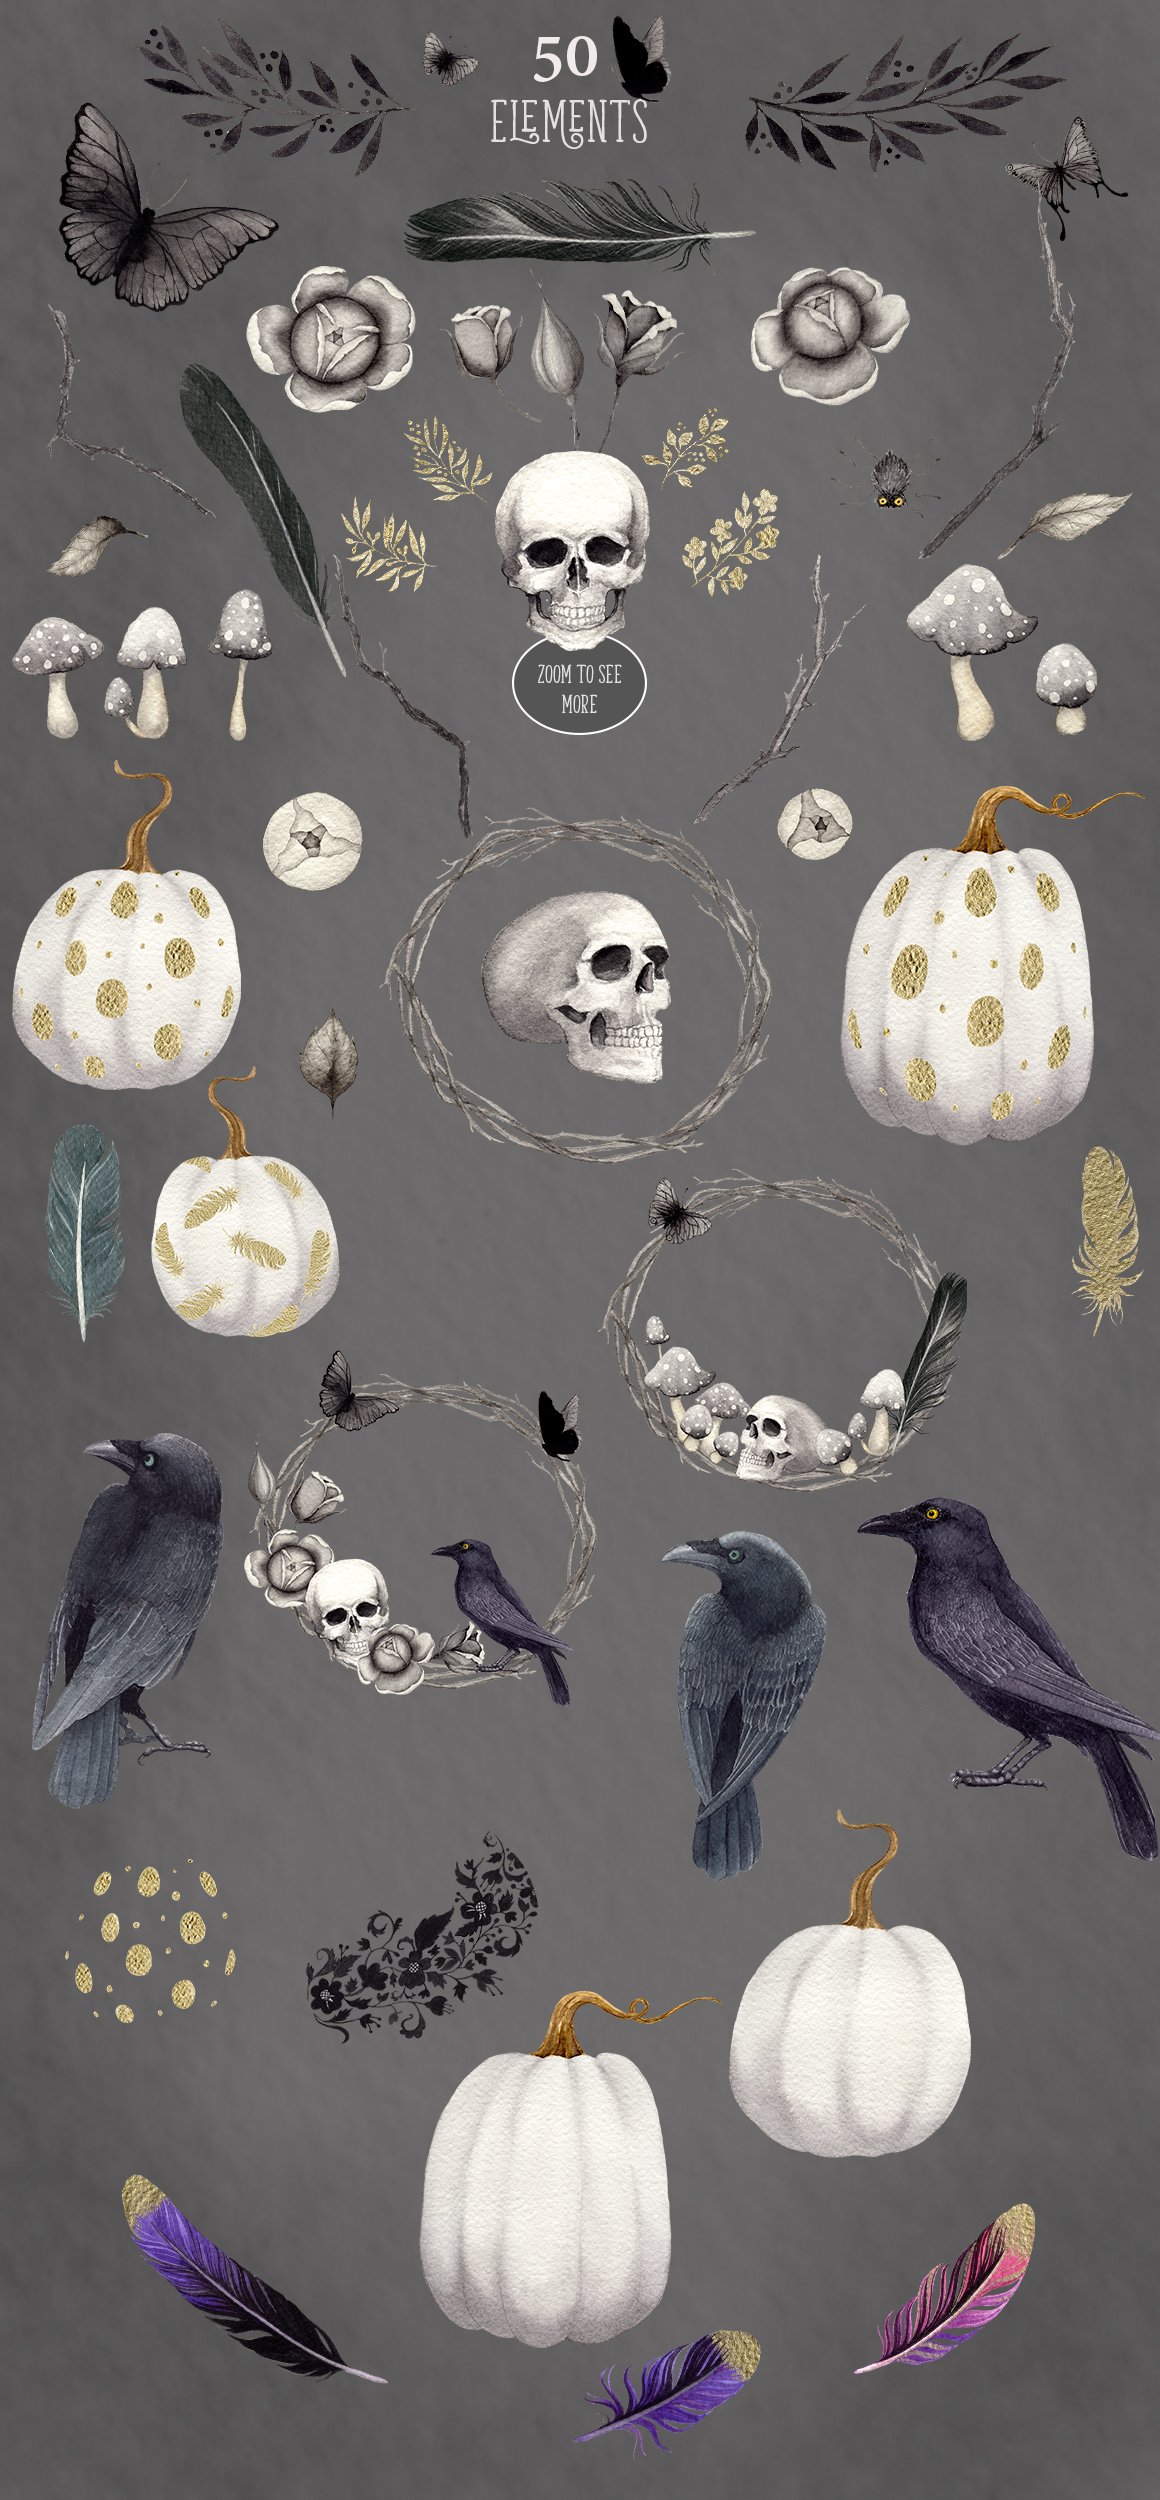 Crows and skulls and other drawings in the style of Halloween.